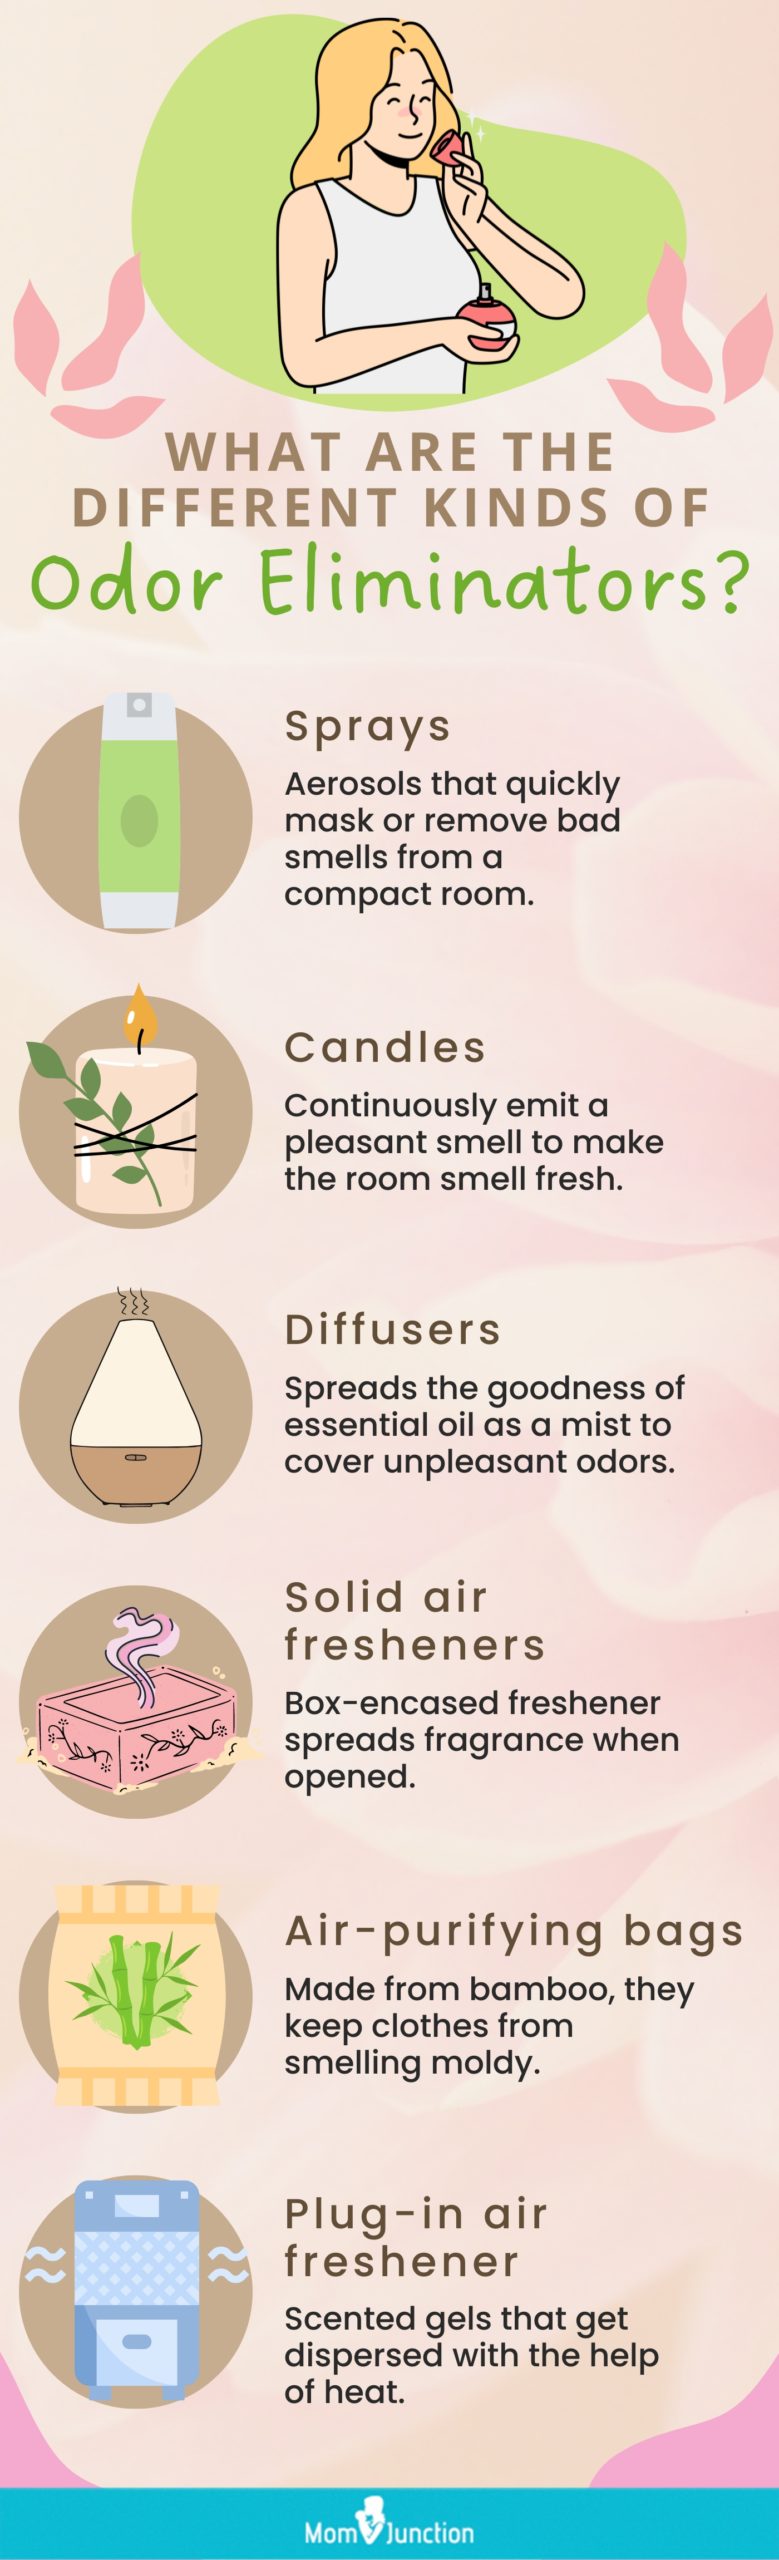 What Are The Different Kinds of Odor Eliminators